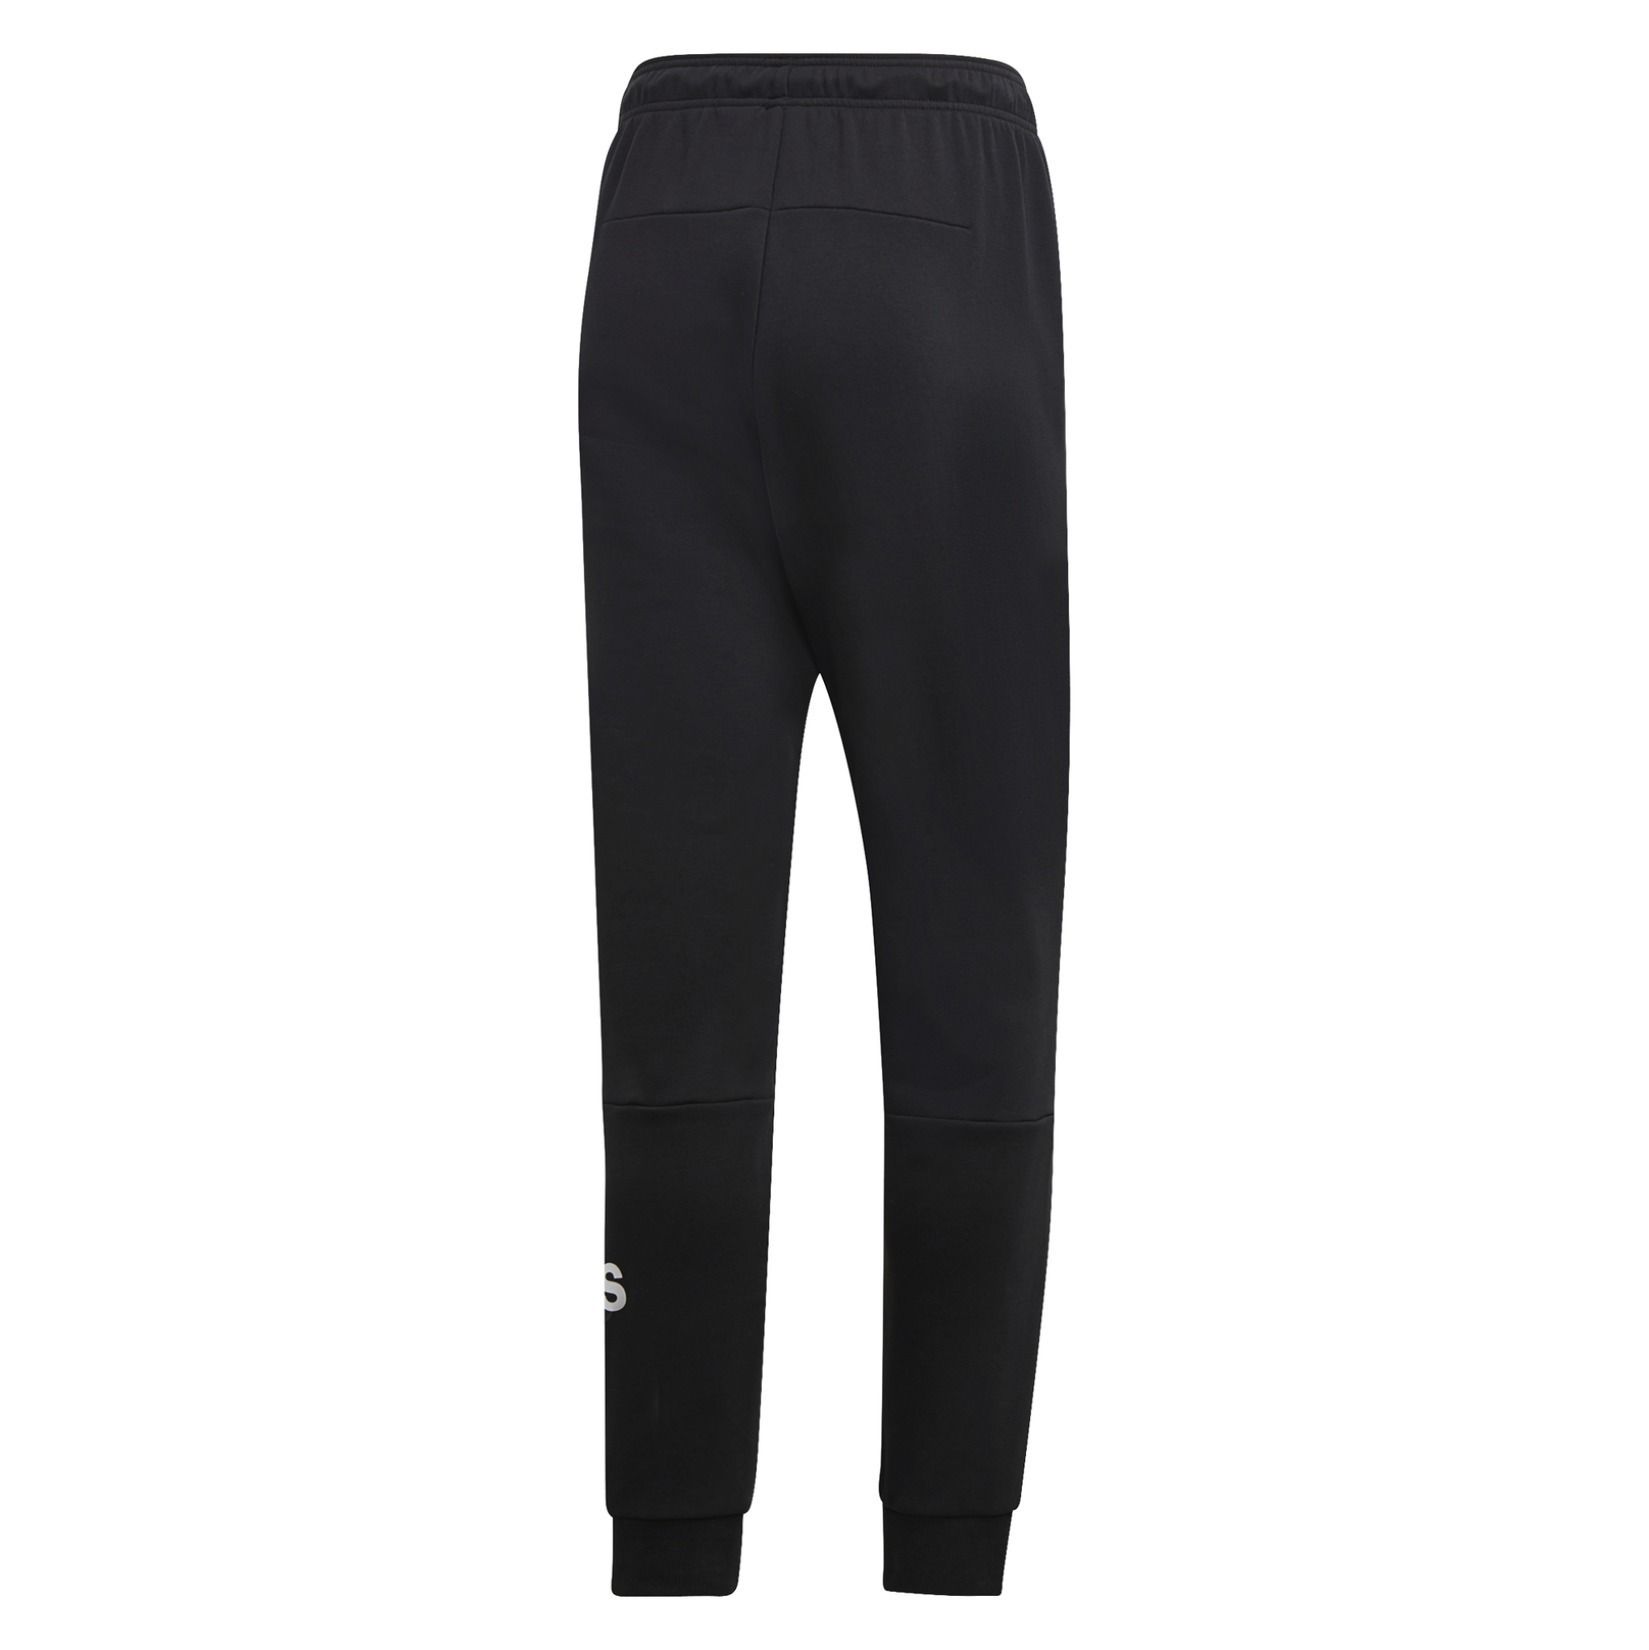 Adidas Must Haves French Terry Badge Of Sport Pants